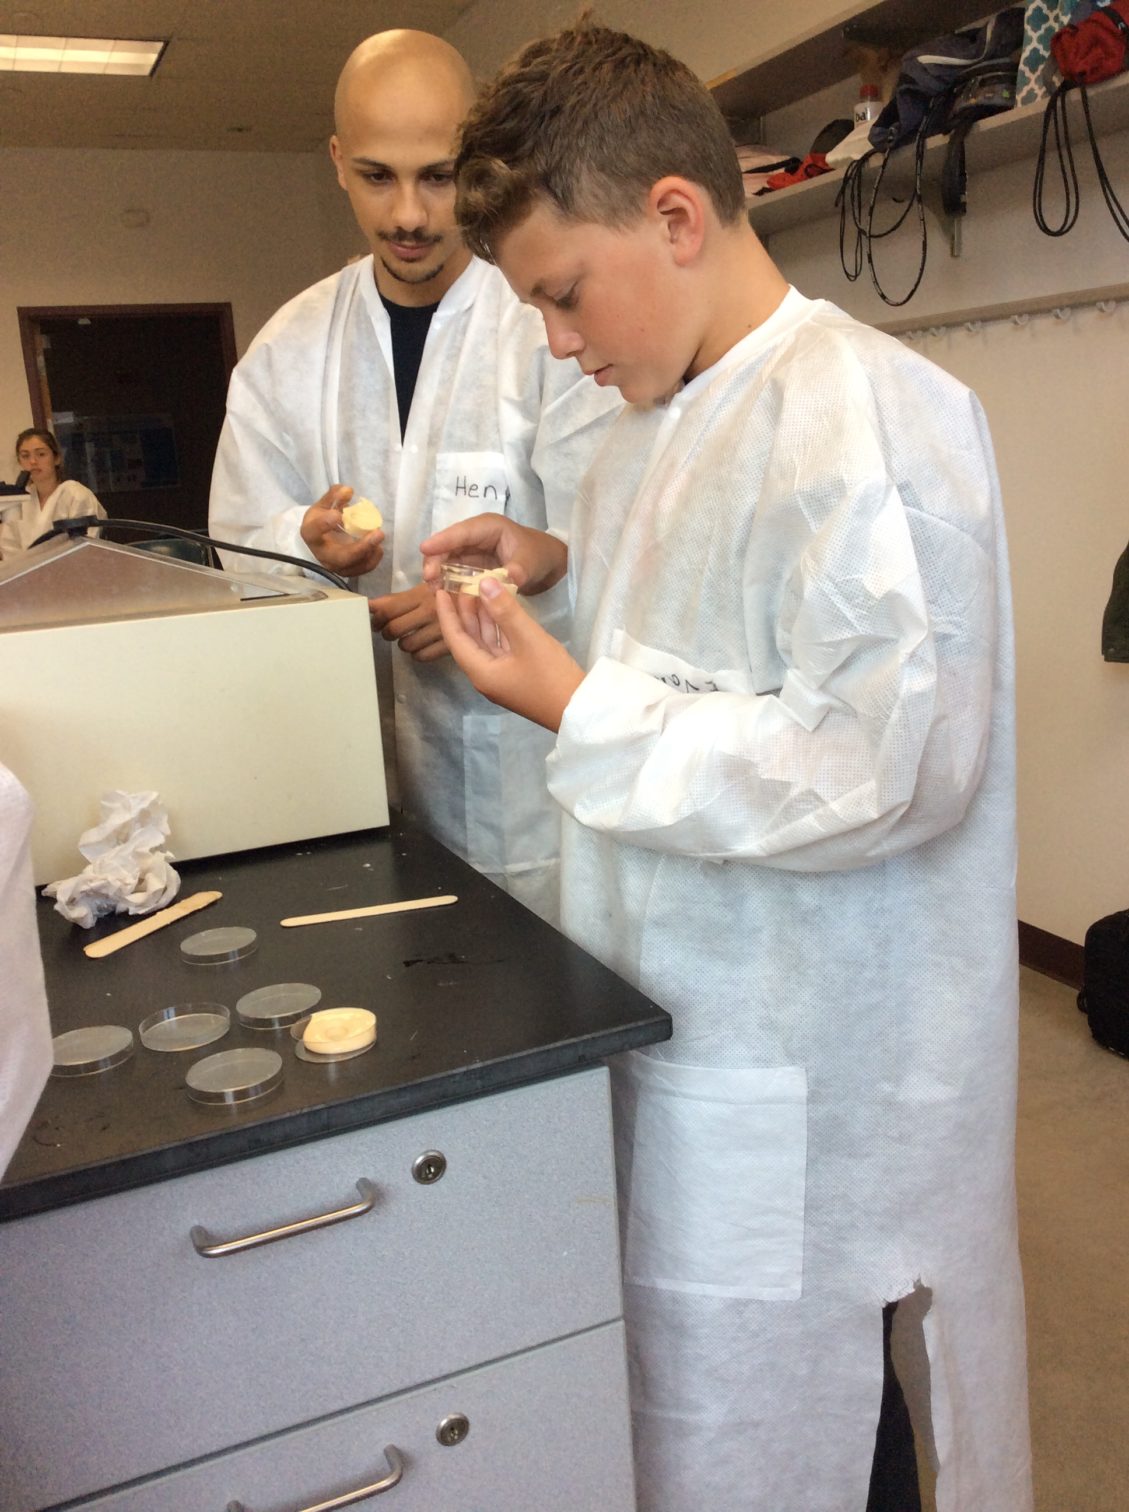 Students in the chemistry lab working on an experiment.